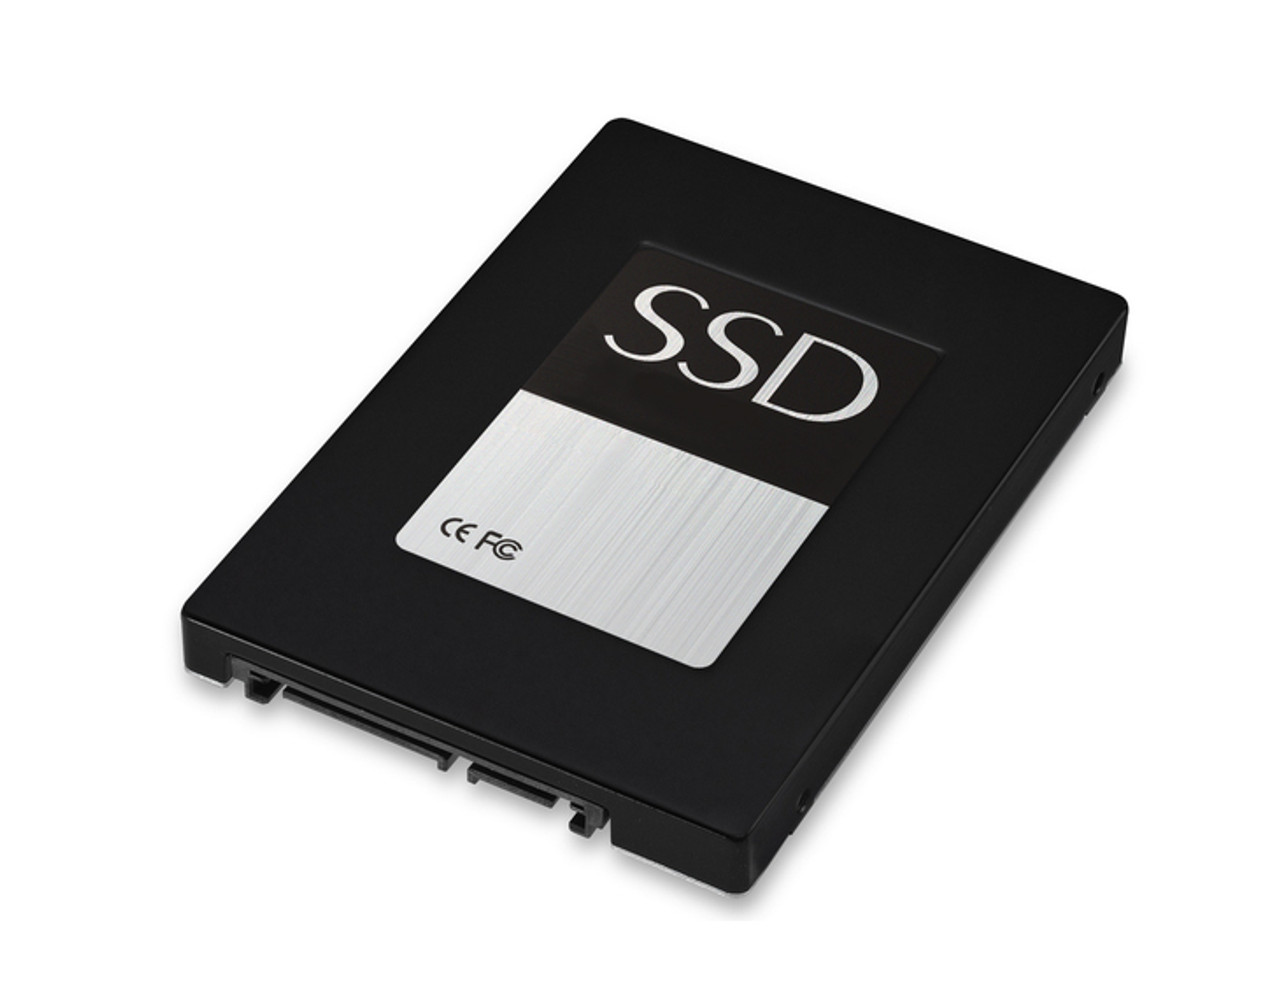 How To Use An SSD